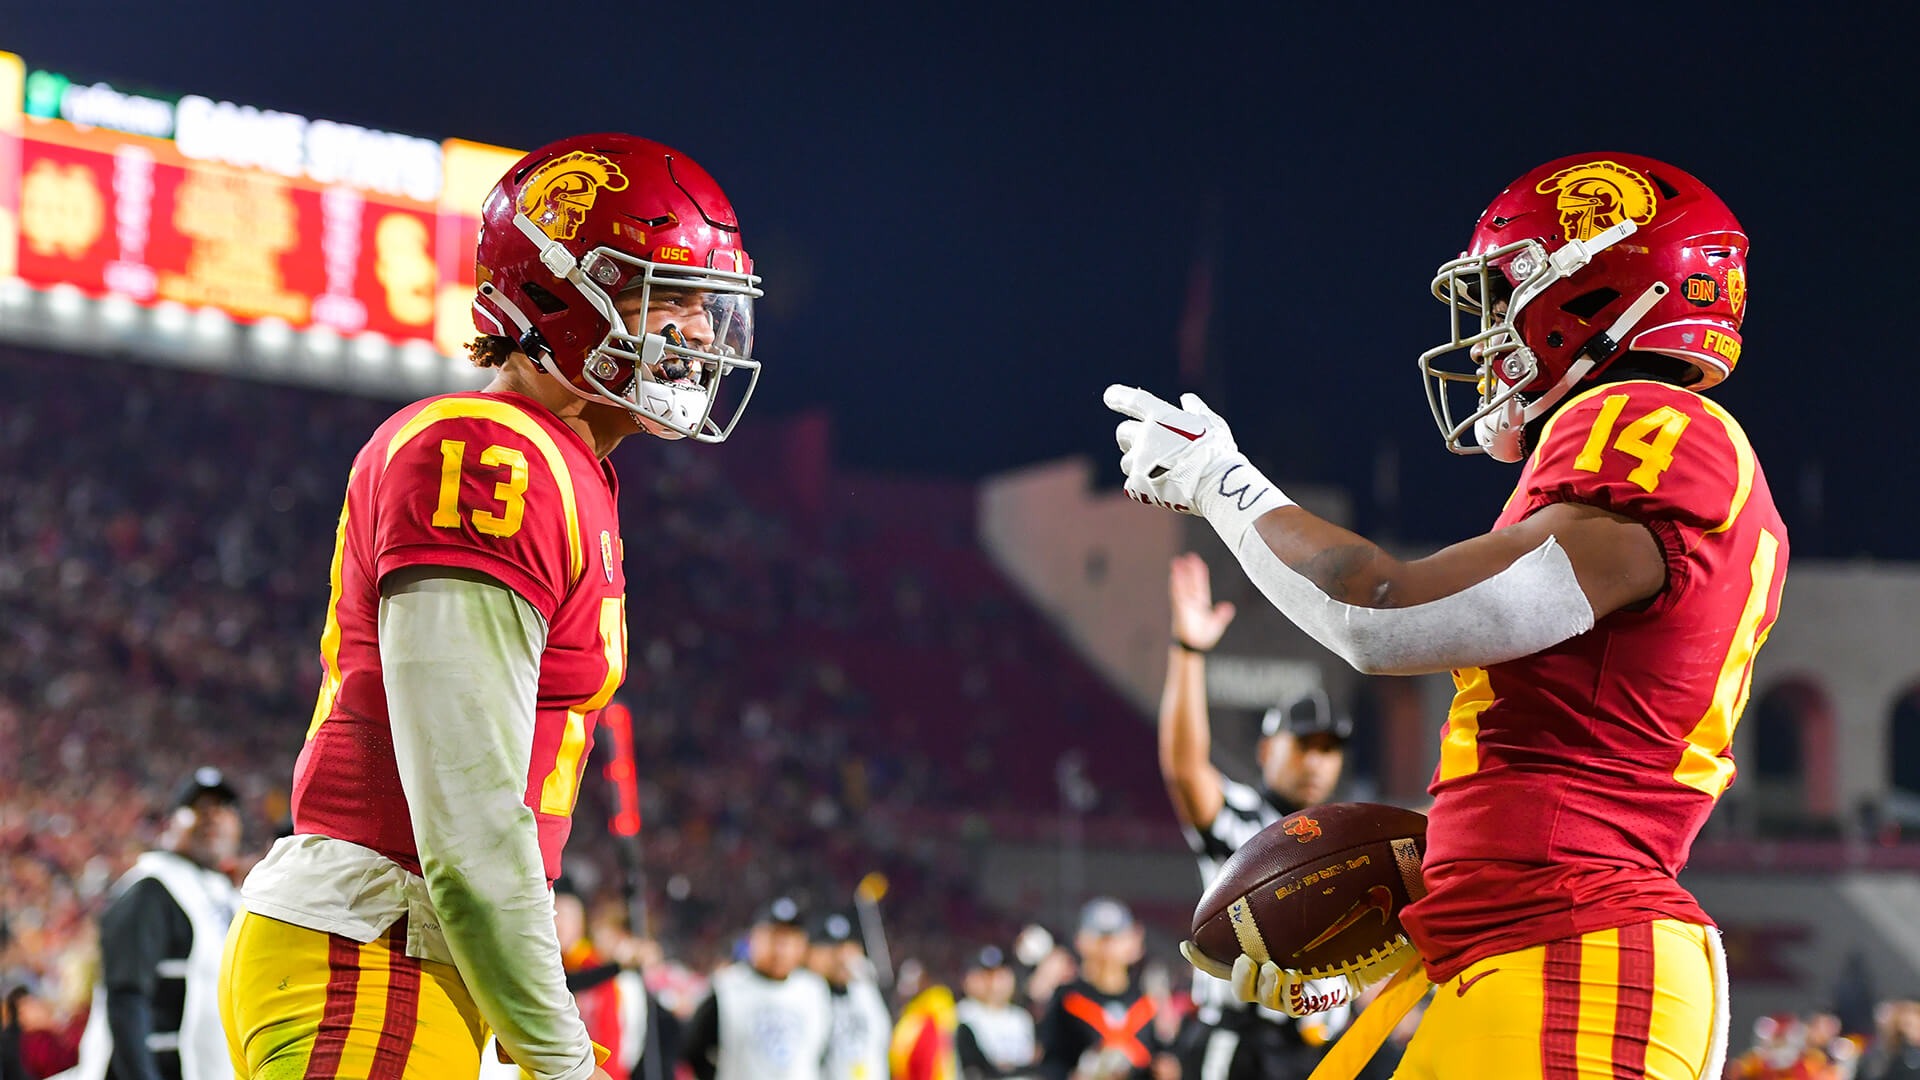 How To Watch USC Football